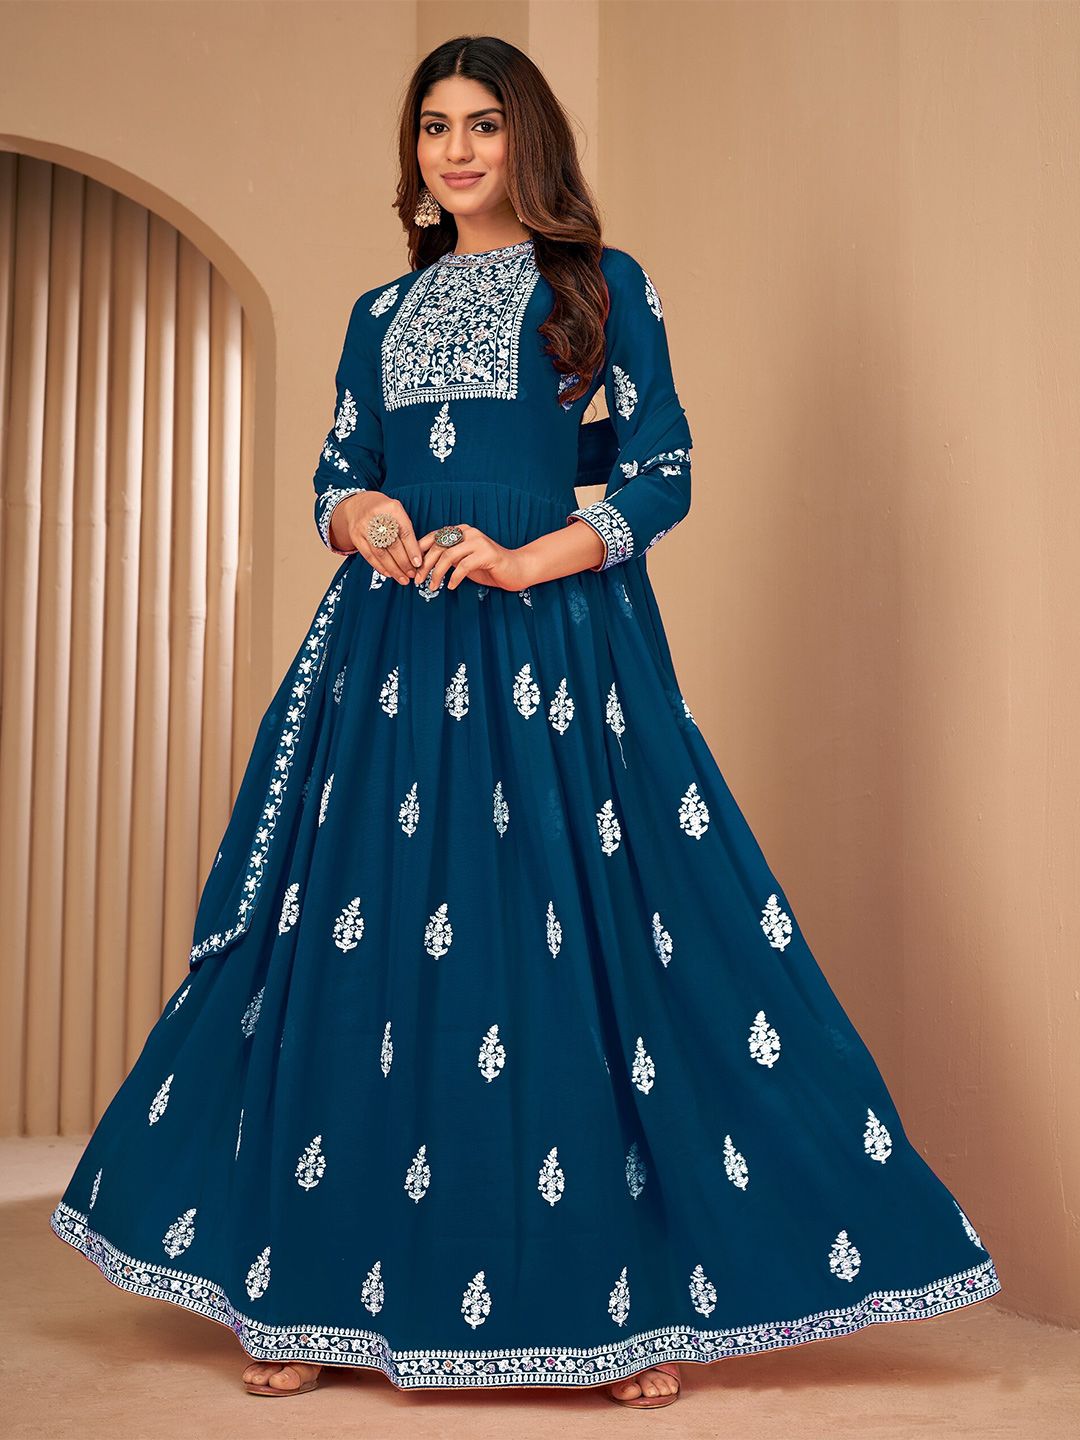 Divine International Trading Co Turquoise Blue & White Embroidered Unstitched Dress Material Price in India